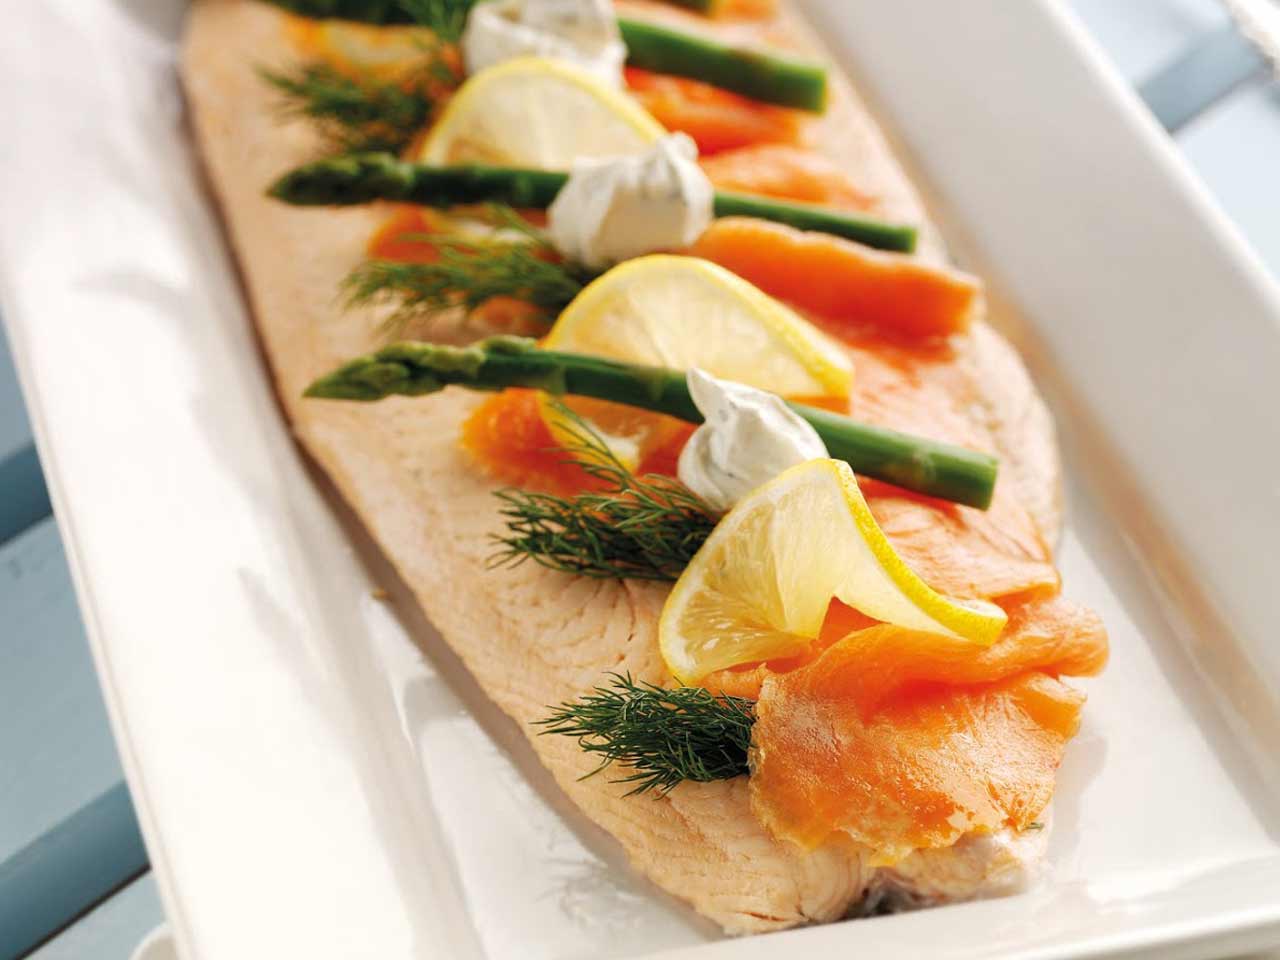 Poached salmon garnished with lemon wedges, asparagus tips and dill